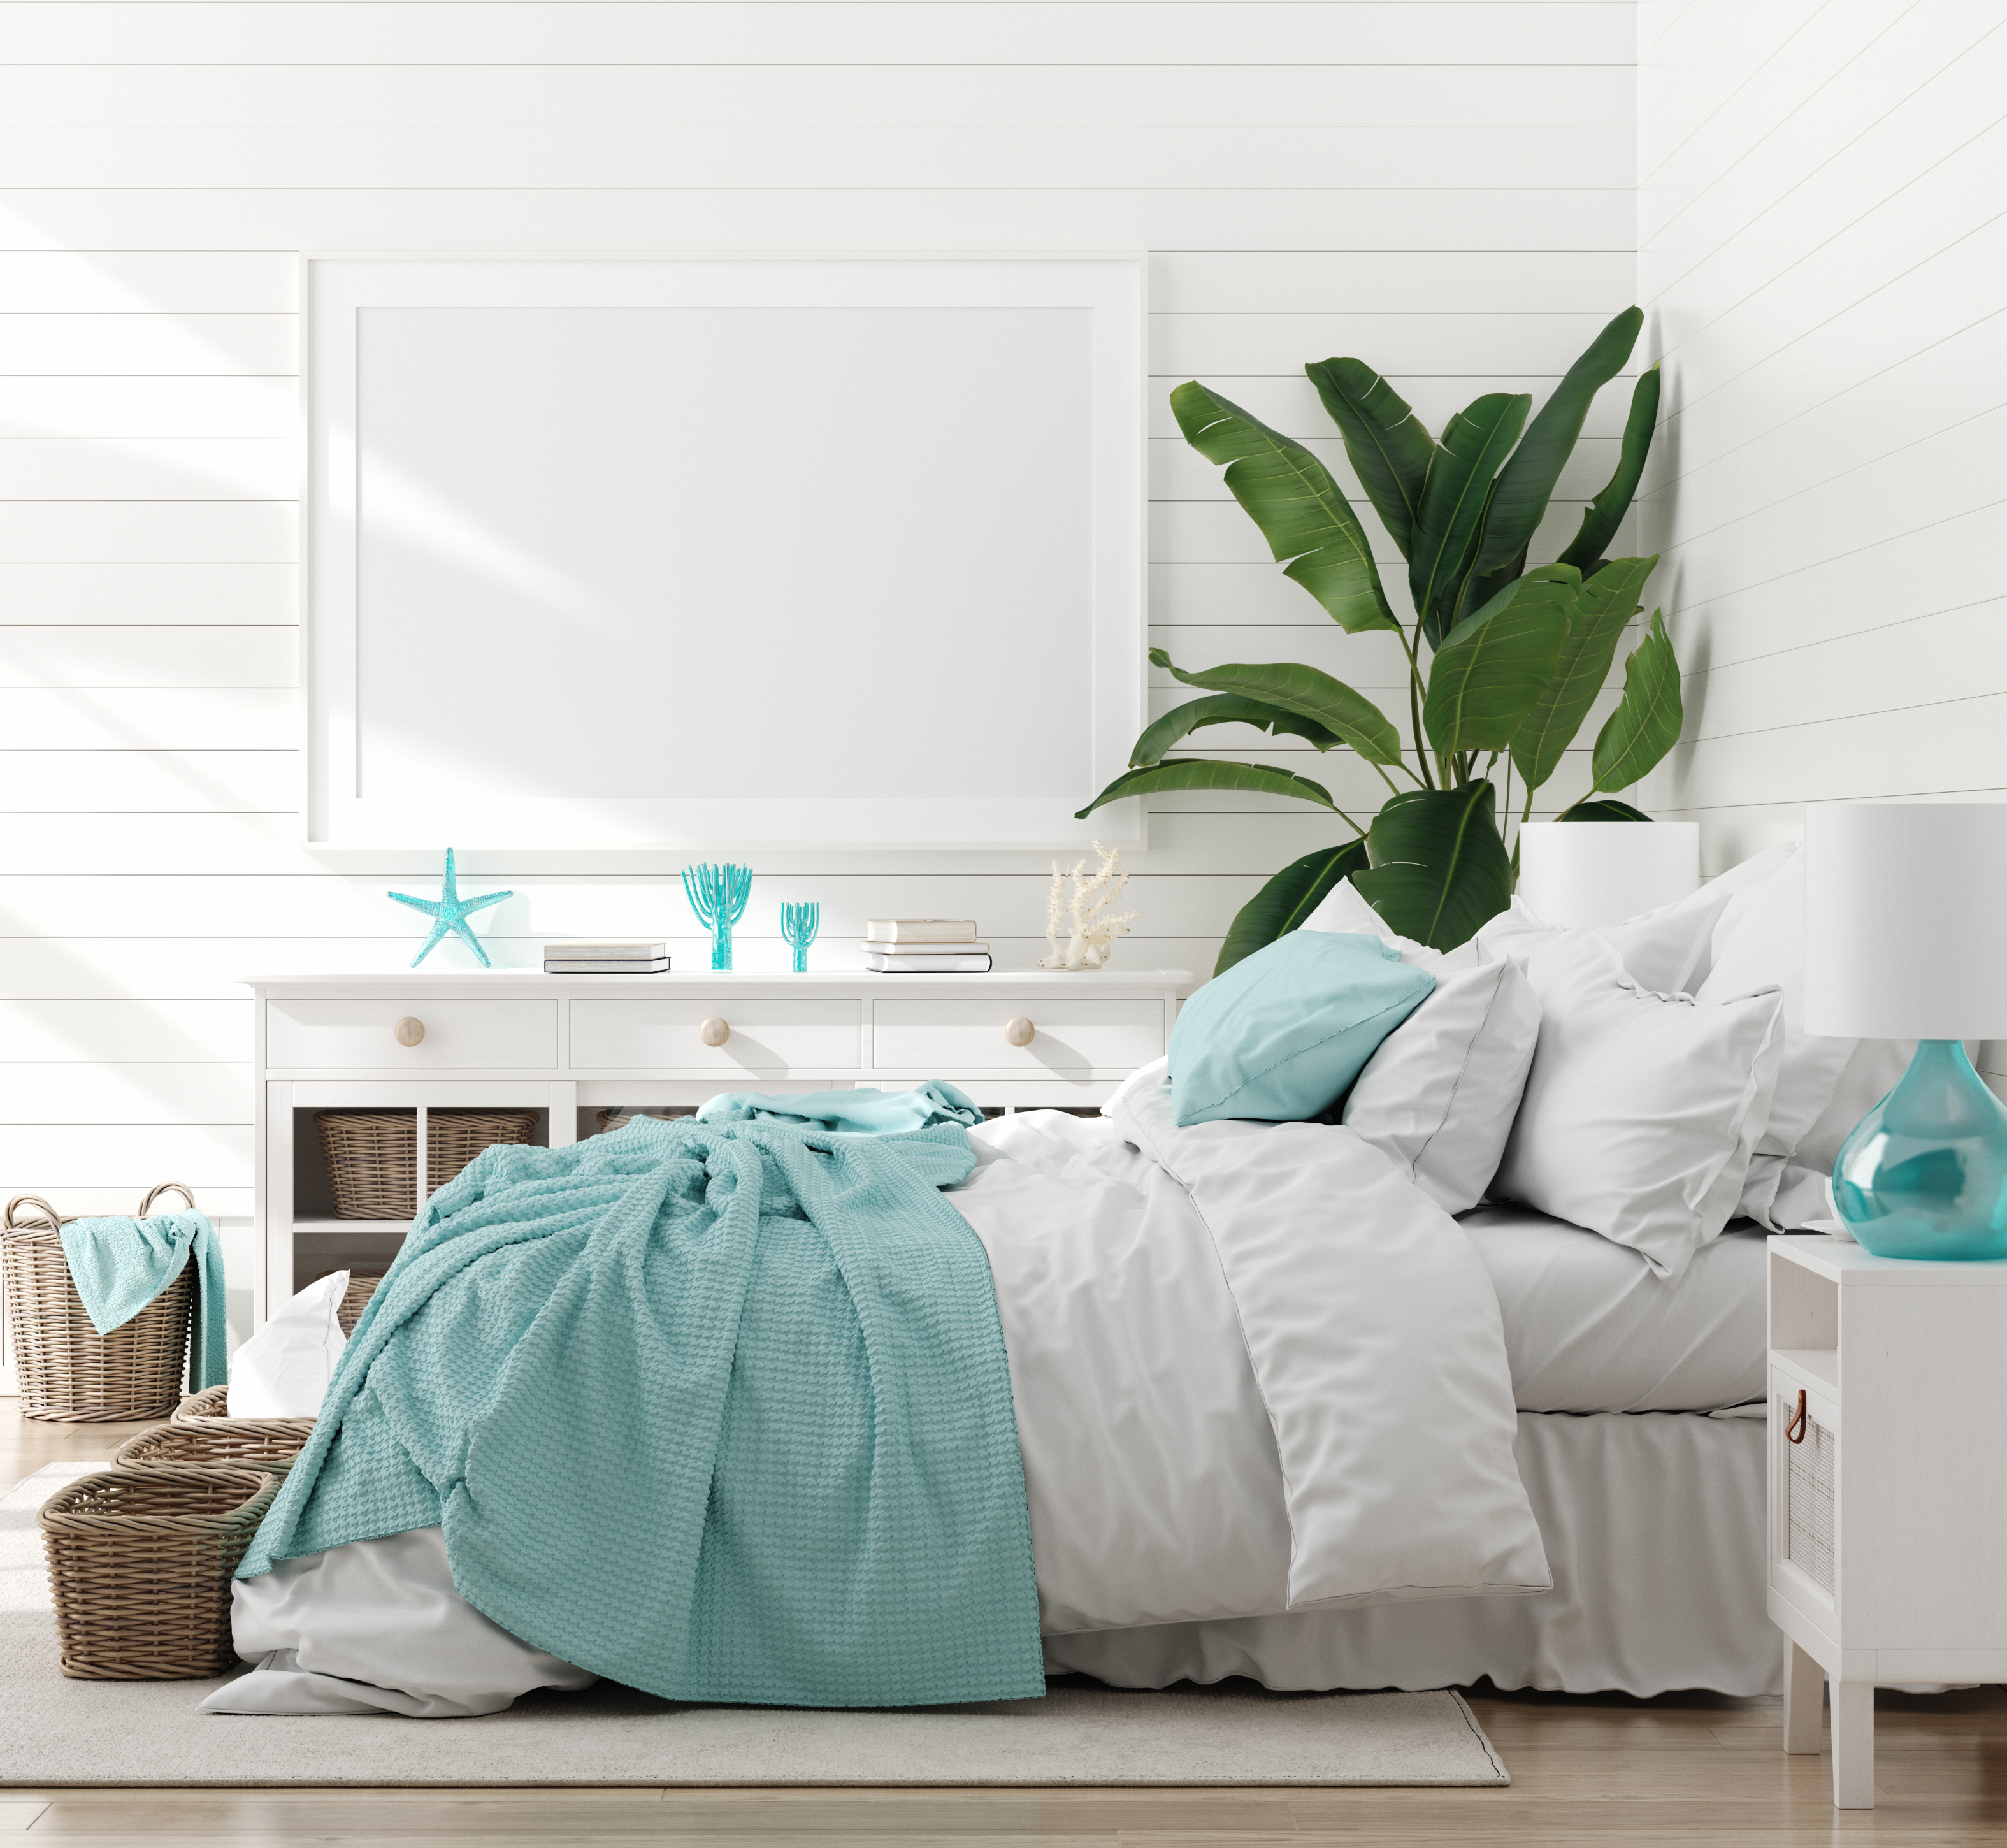 5 complete bedroom sets that will add a creative style to your